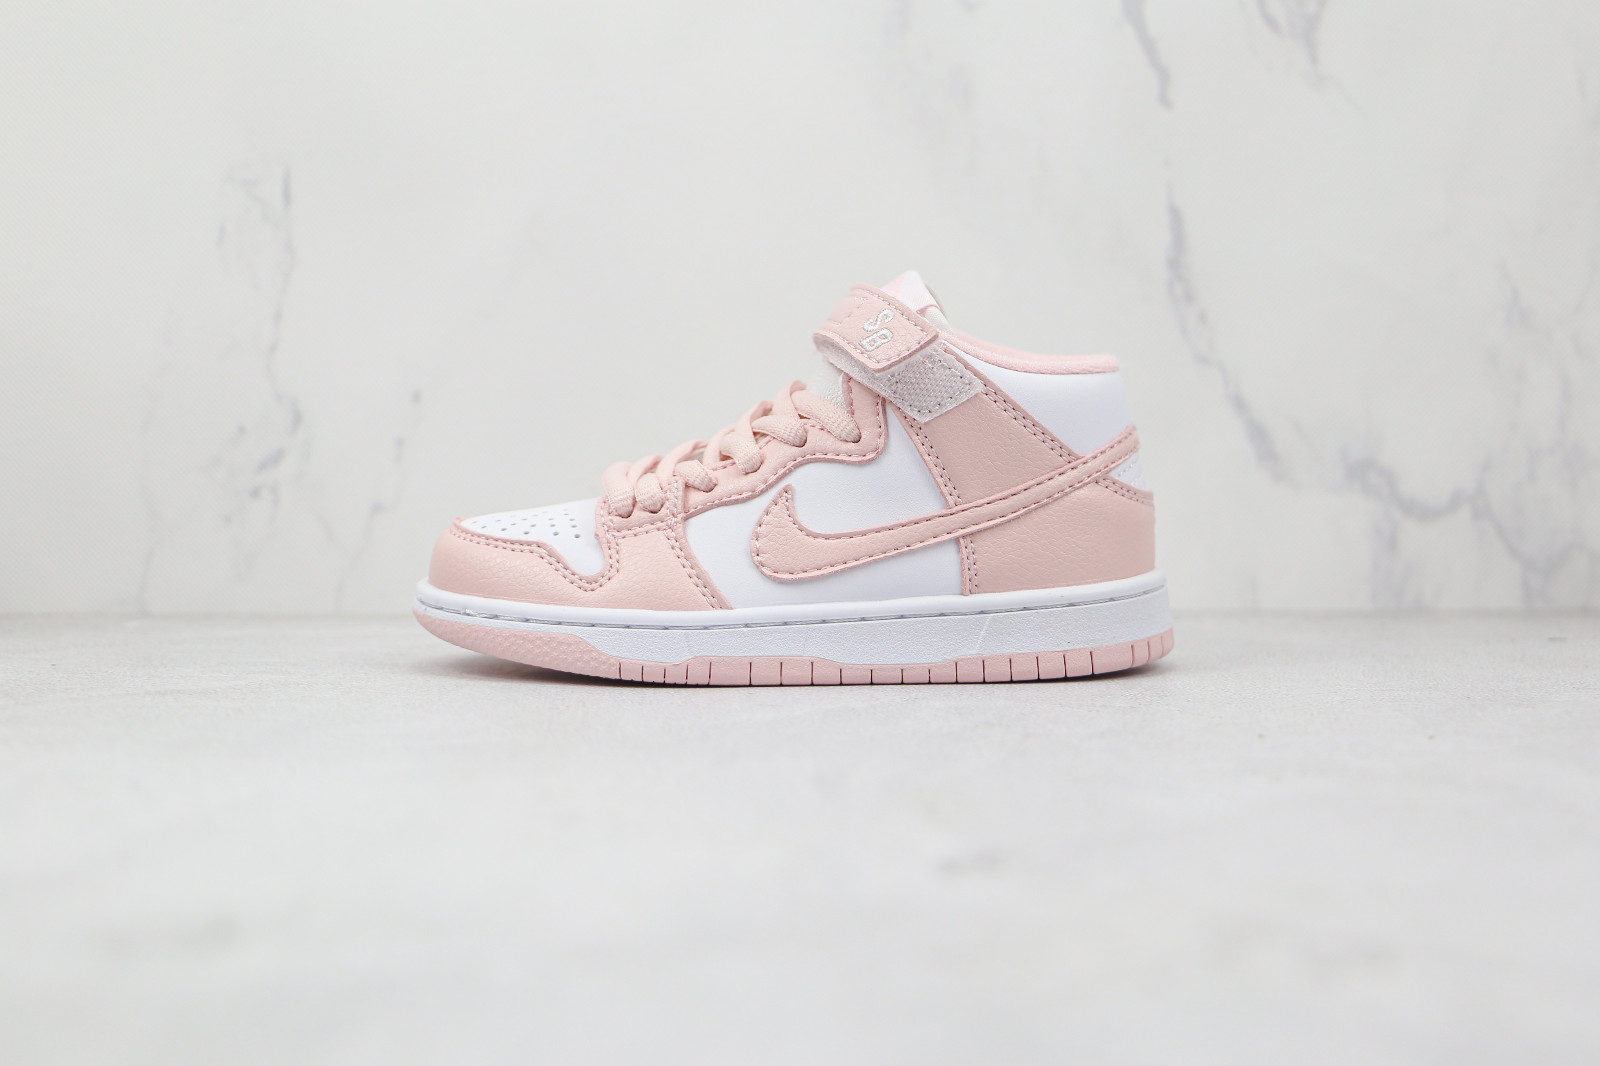 nike by eugene store - 331 - - Nike SB Dunk Mid PRO ISO White Pink Kids Shoes CD6754